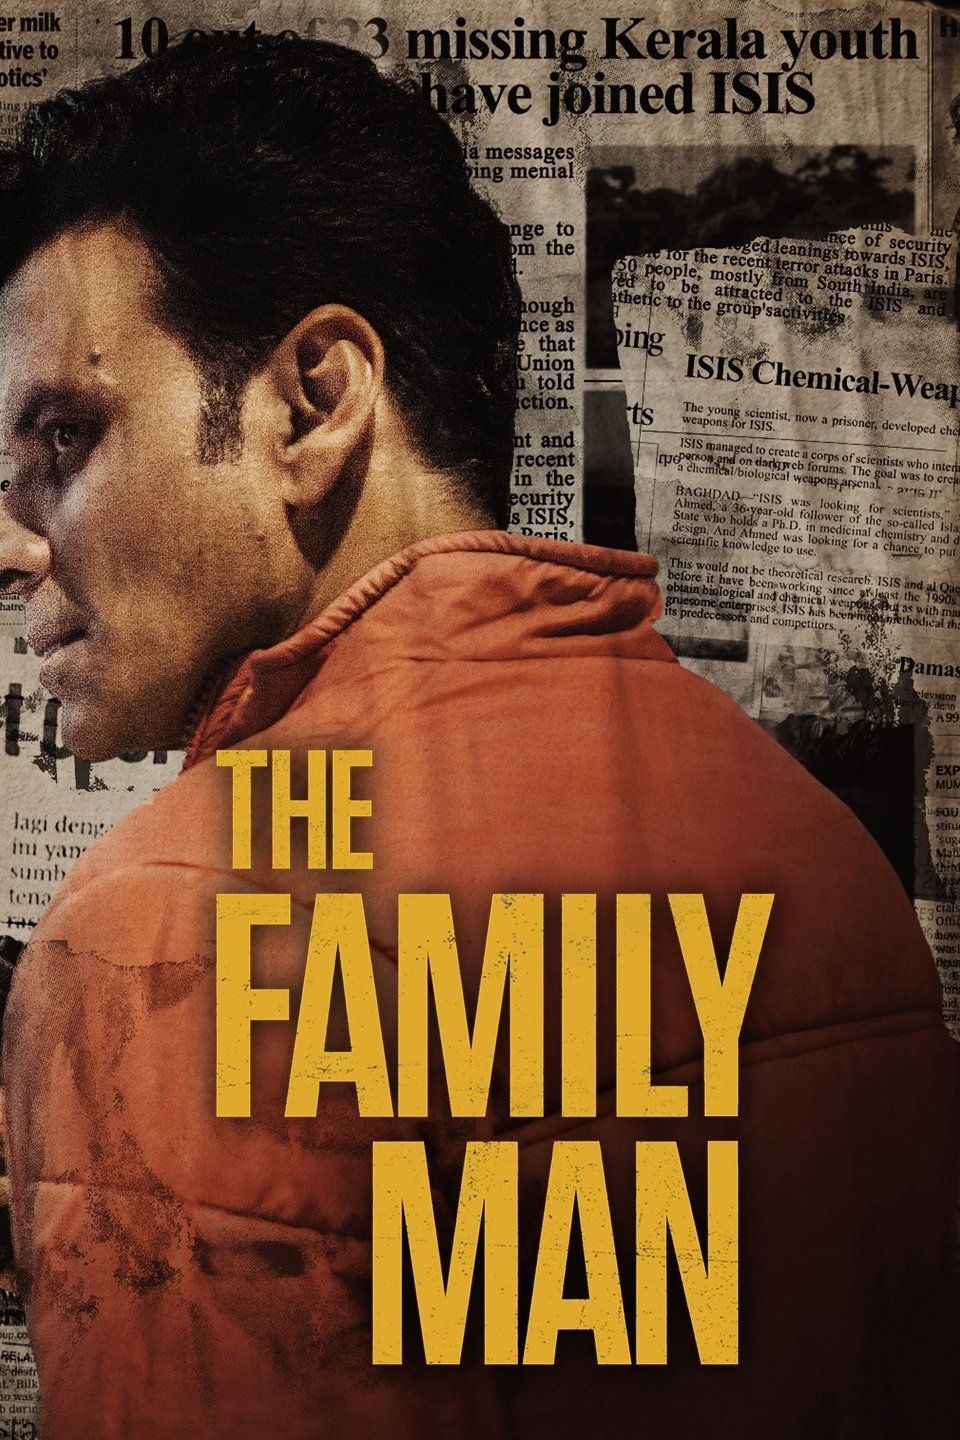 The Family Man 2019 Season 1 (Amazon Prime Video) Complete Downloadp (500MB) -By Moviesstand99. Amazon prime video, Tv series to watch, Family guy